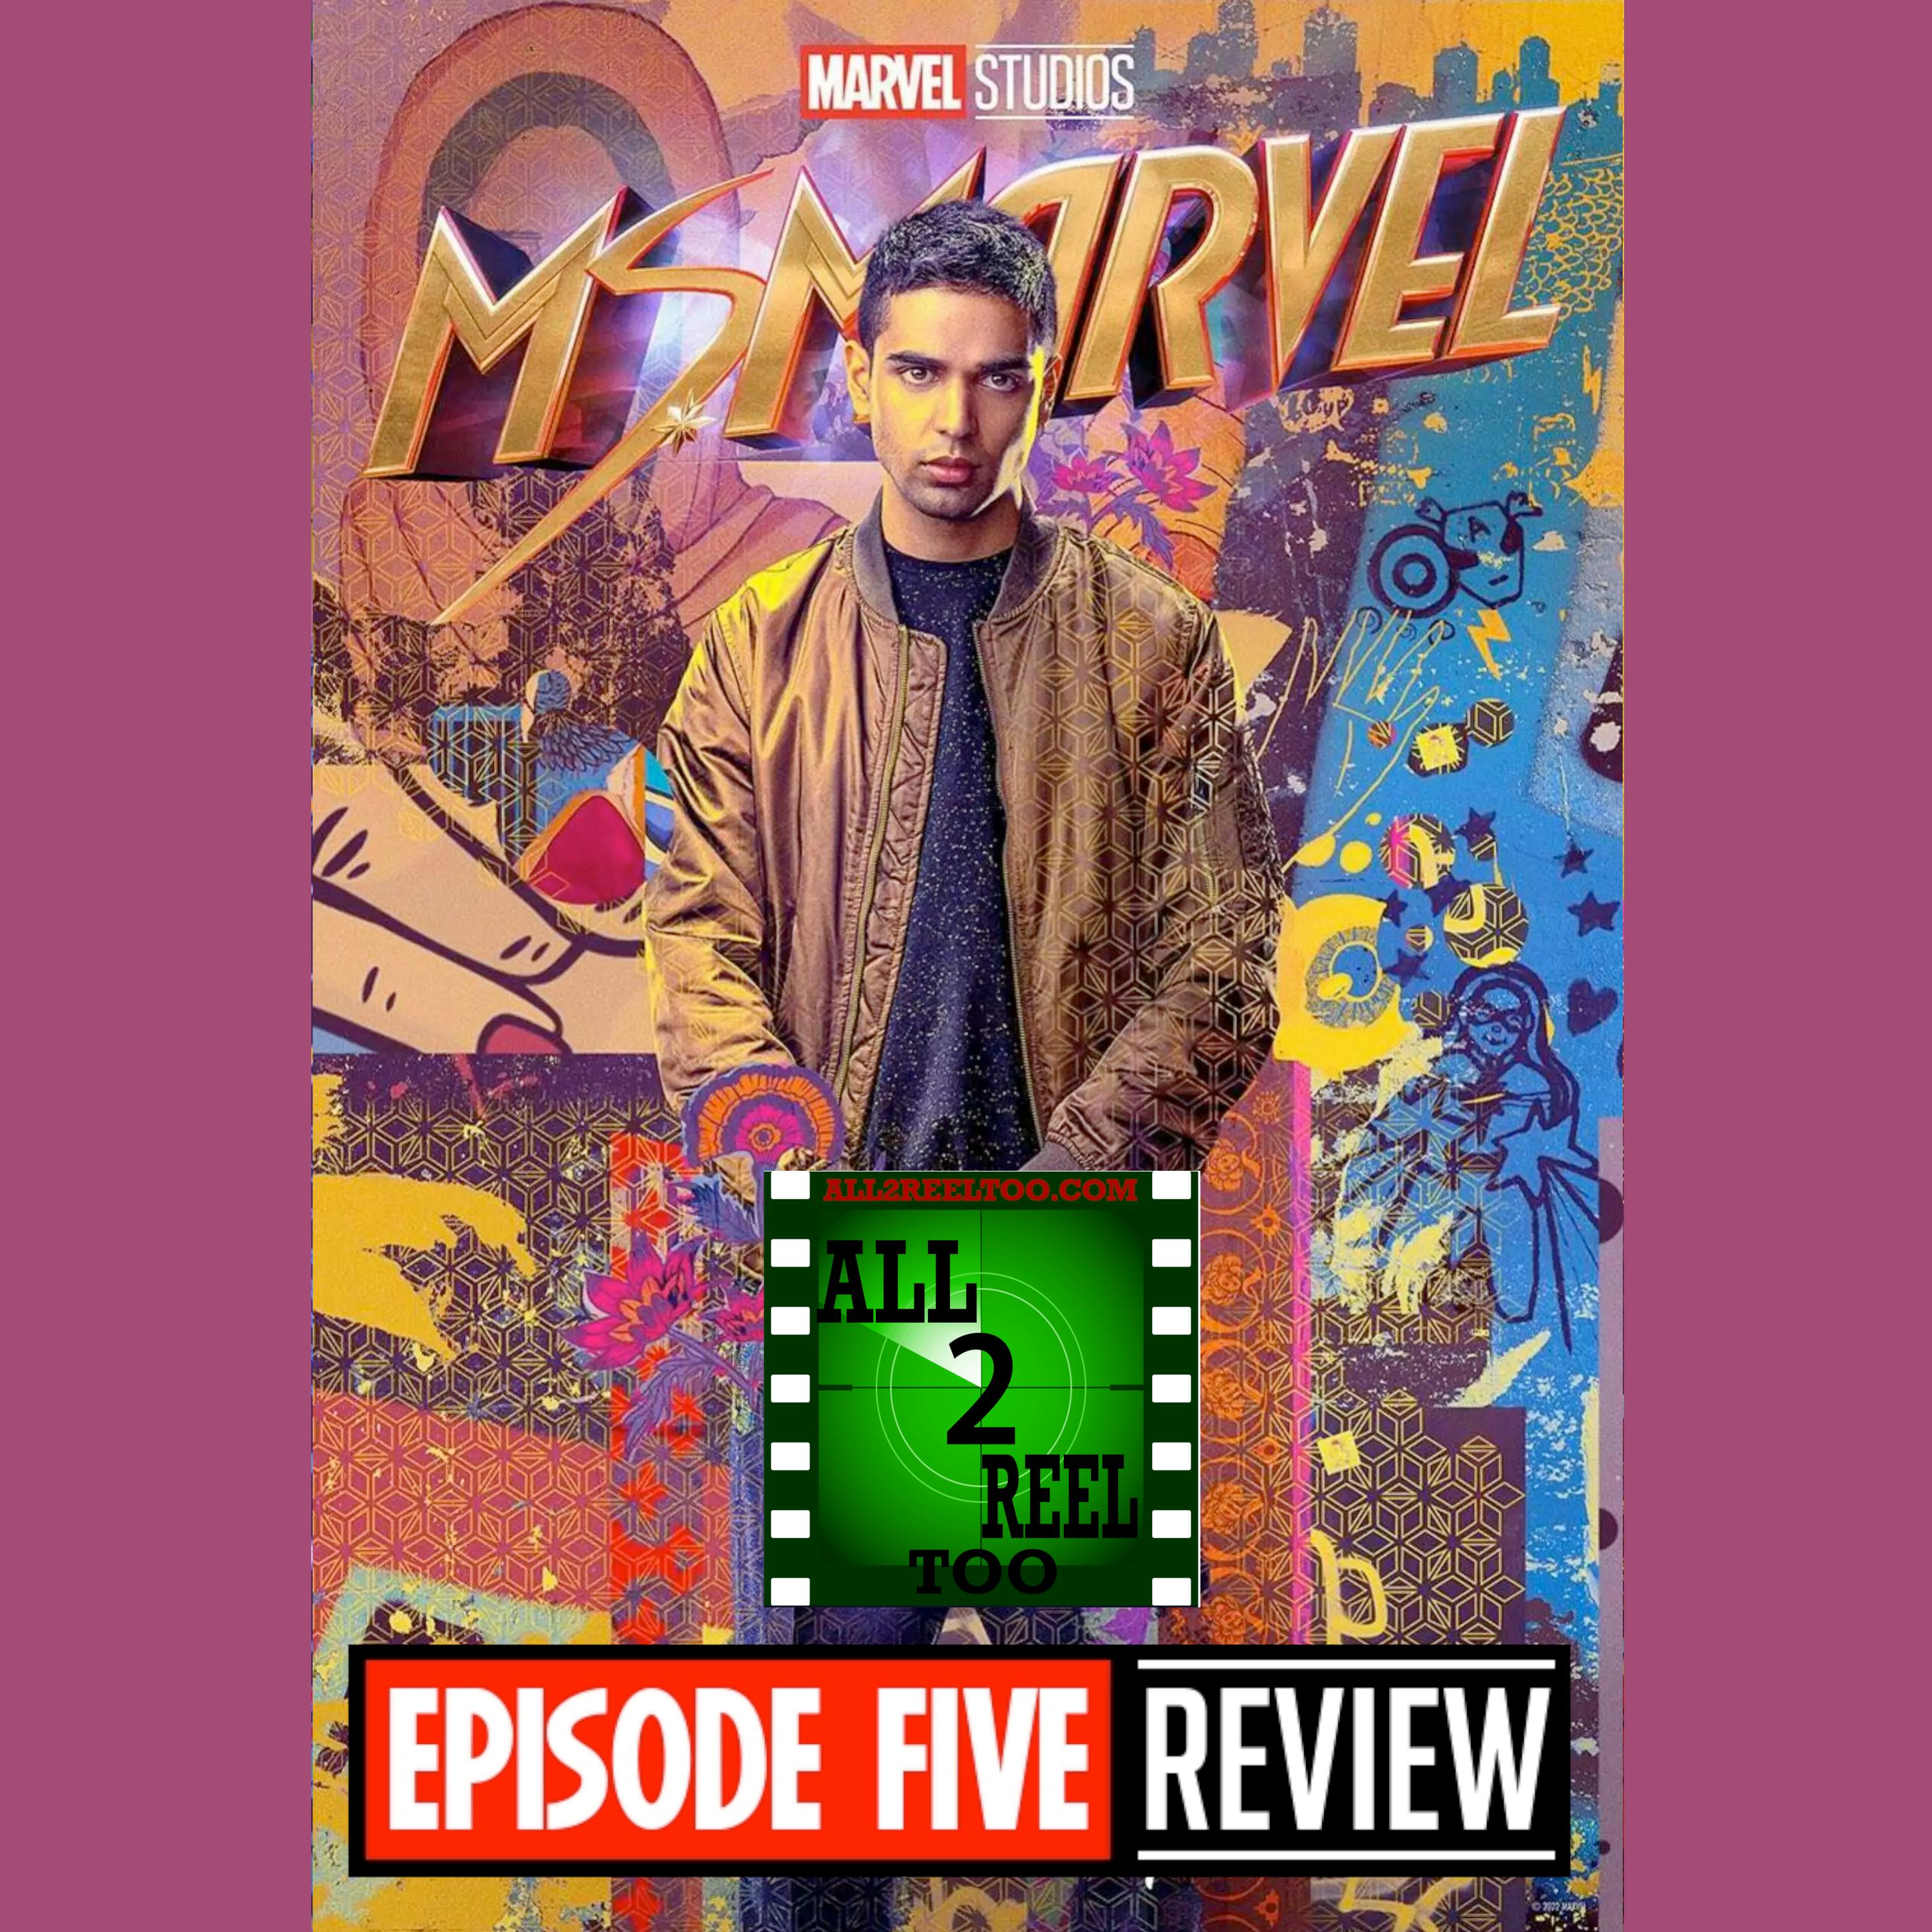 Ms. Marvel EPISODE 5 REVIEW